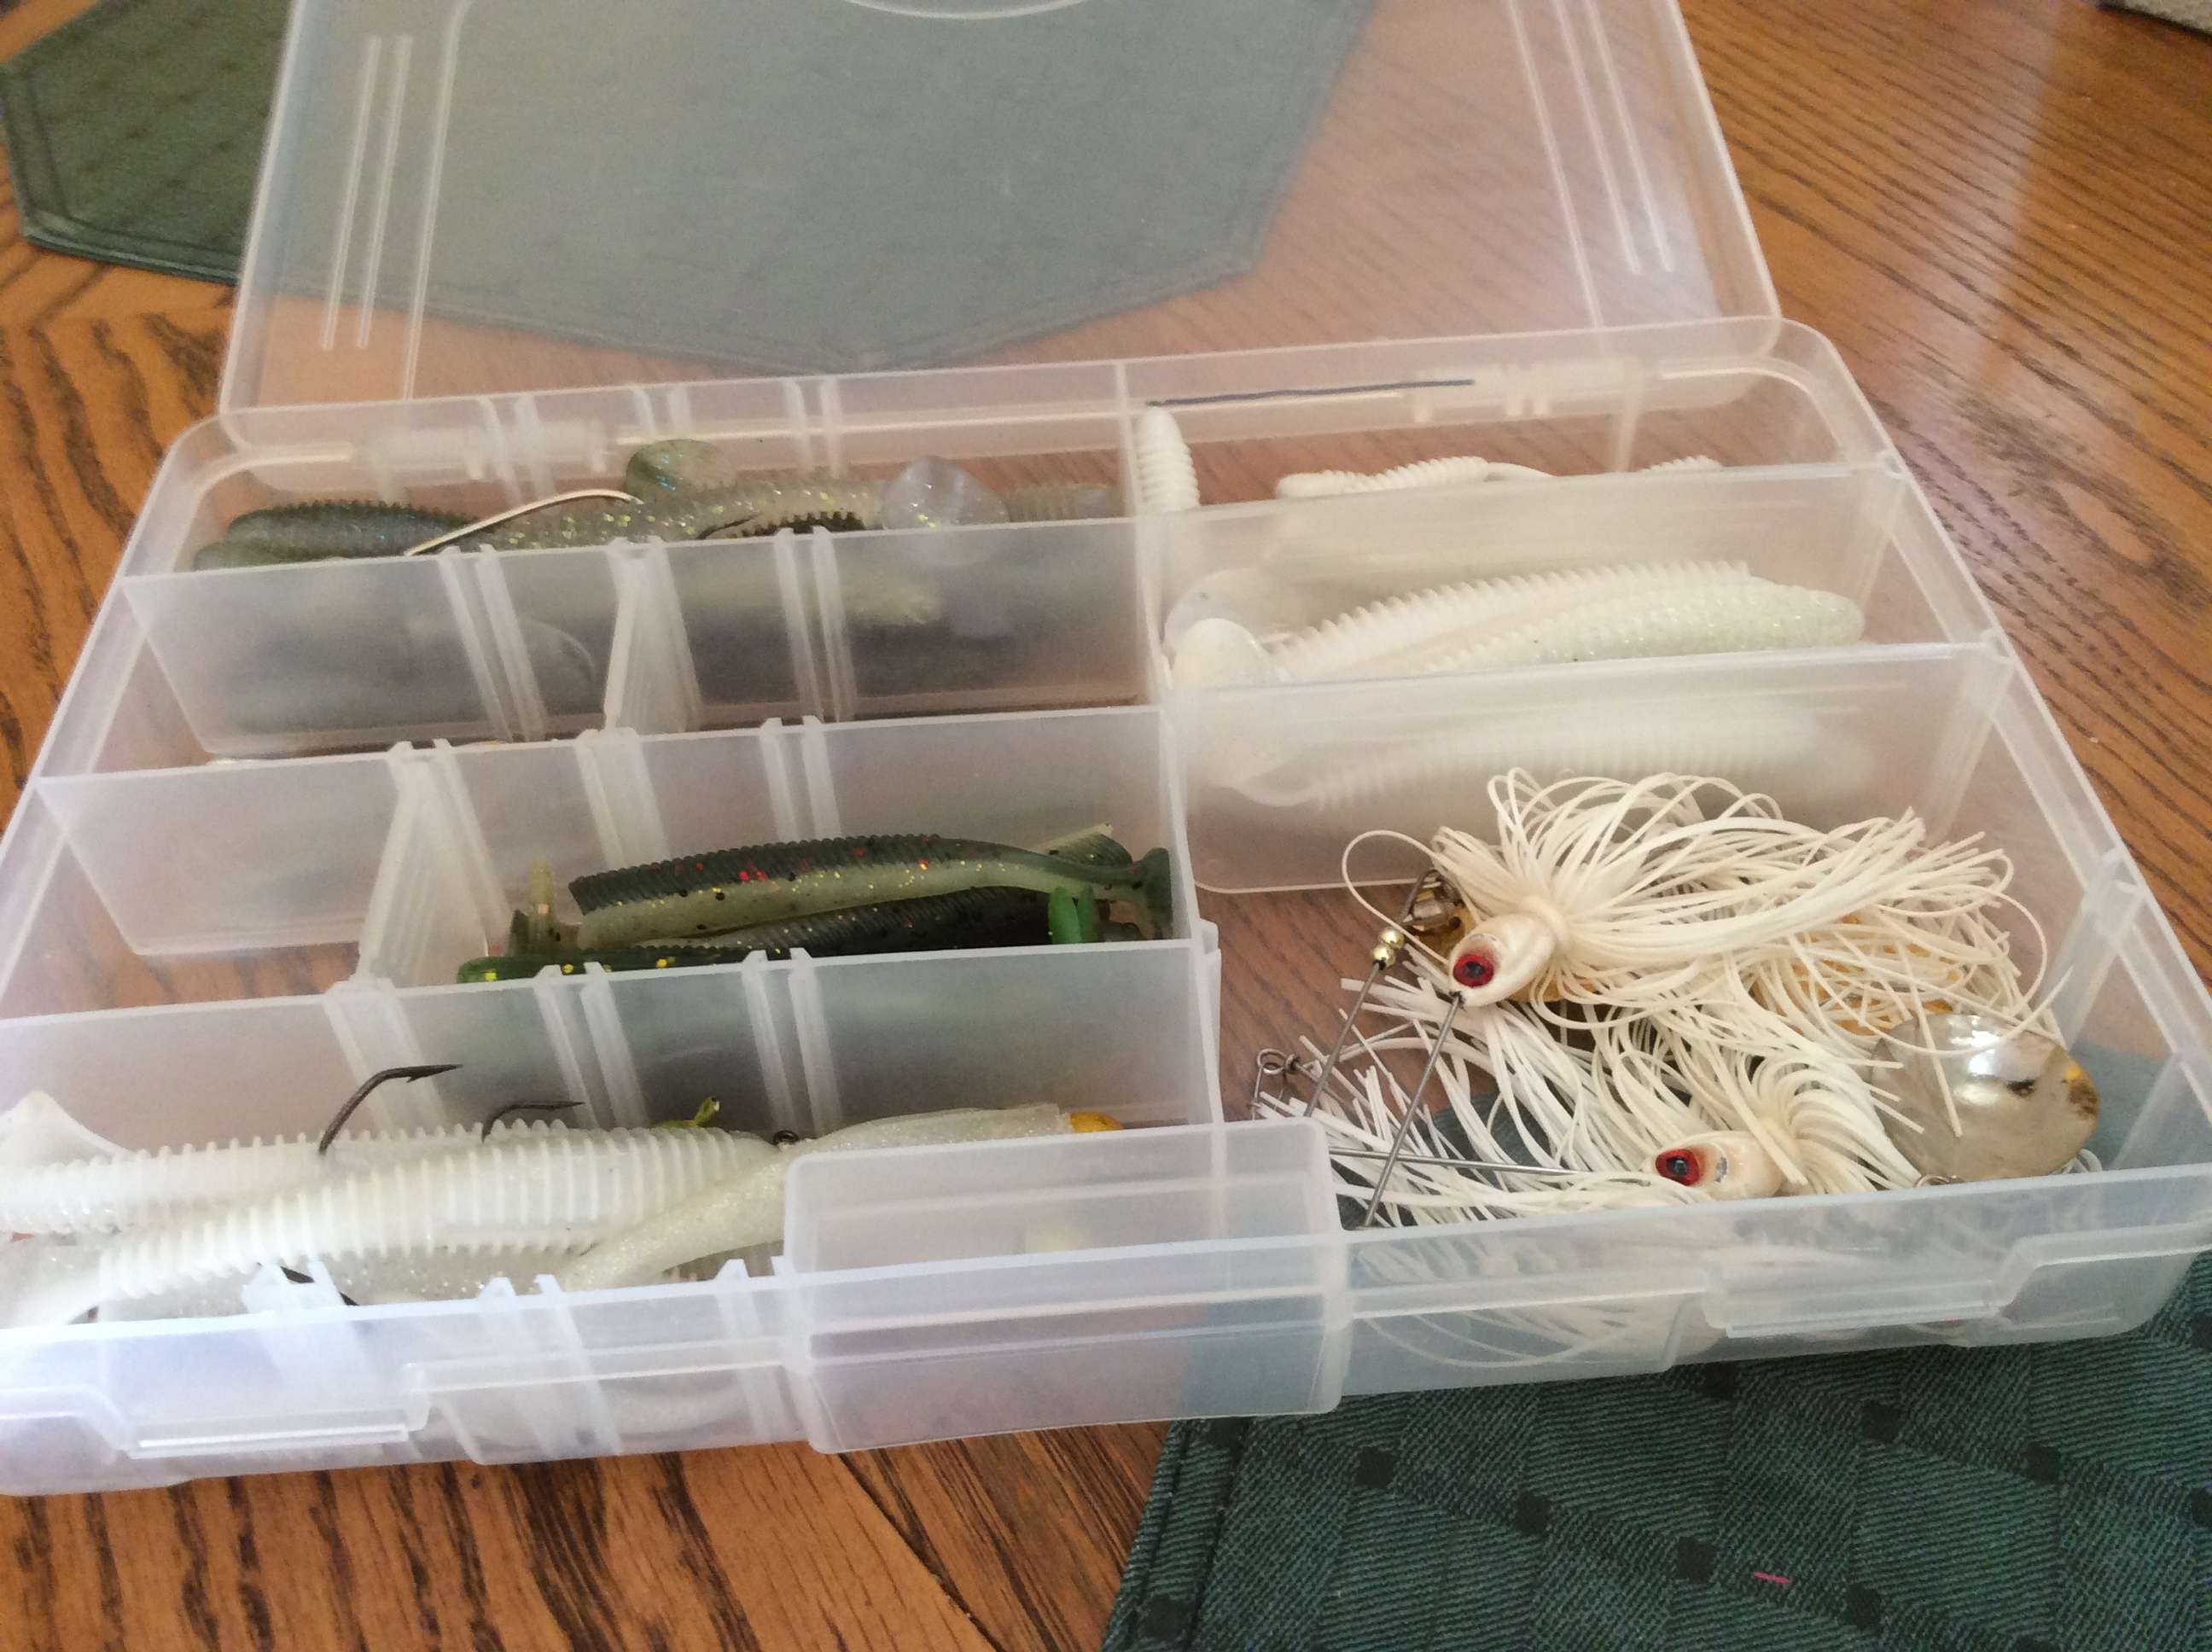 Spinnerbait storage - Fishing Tackle - Bass Fishing Forums